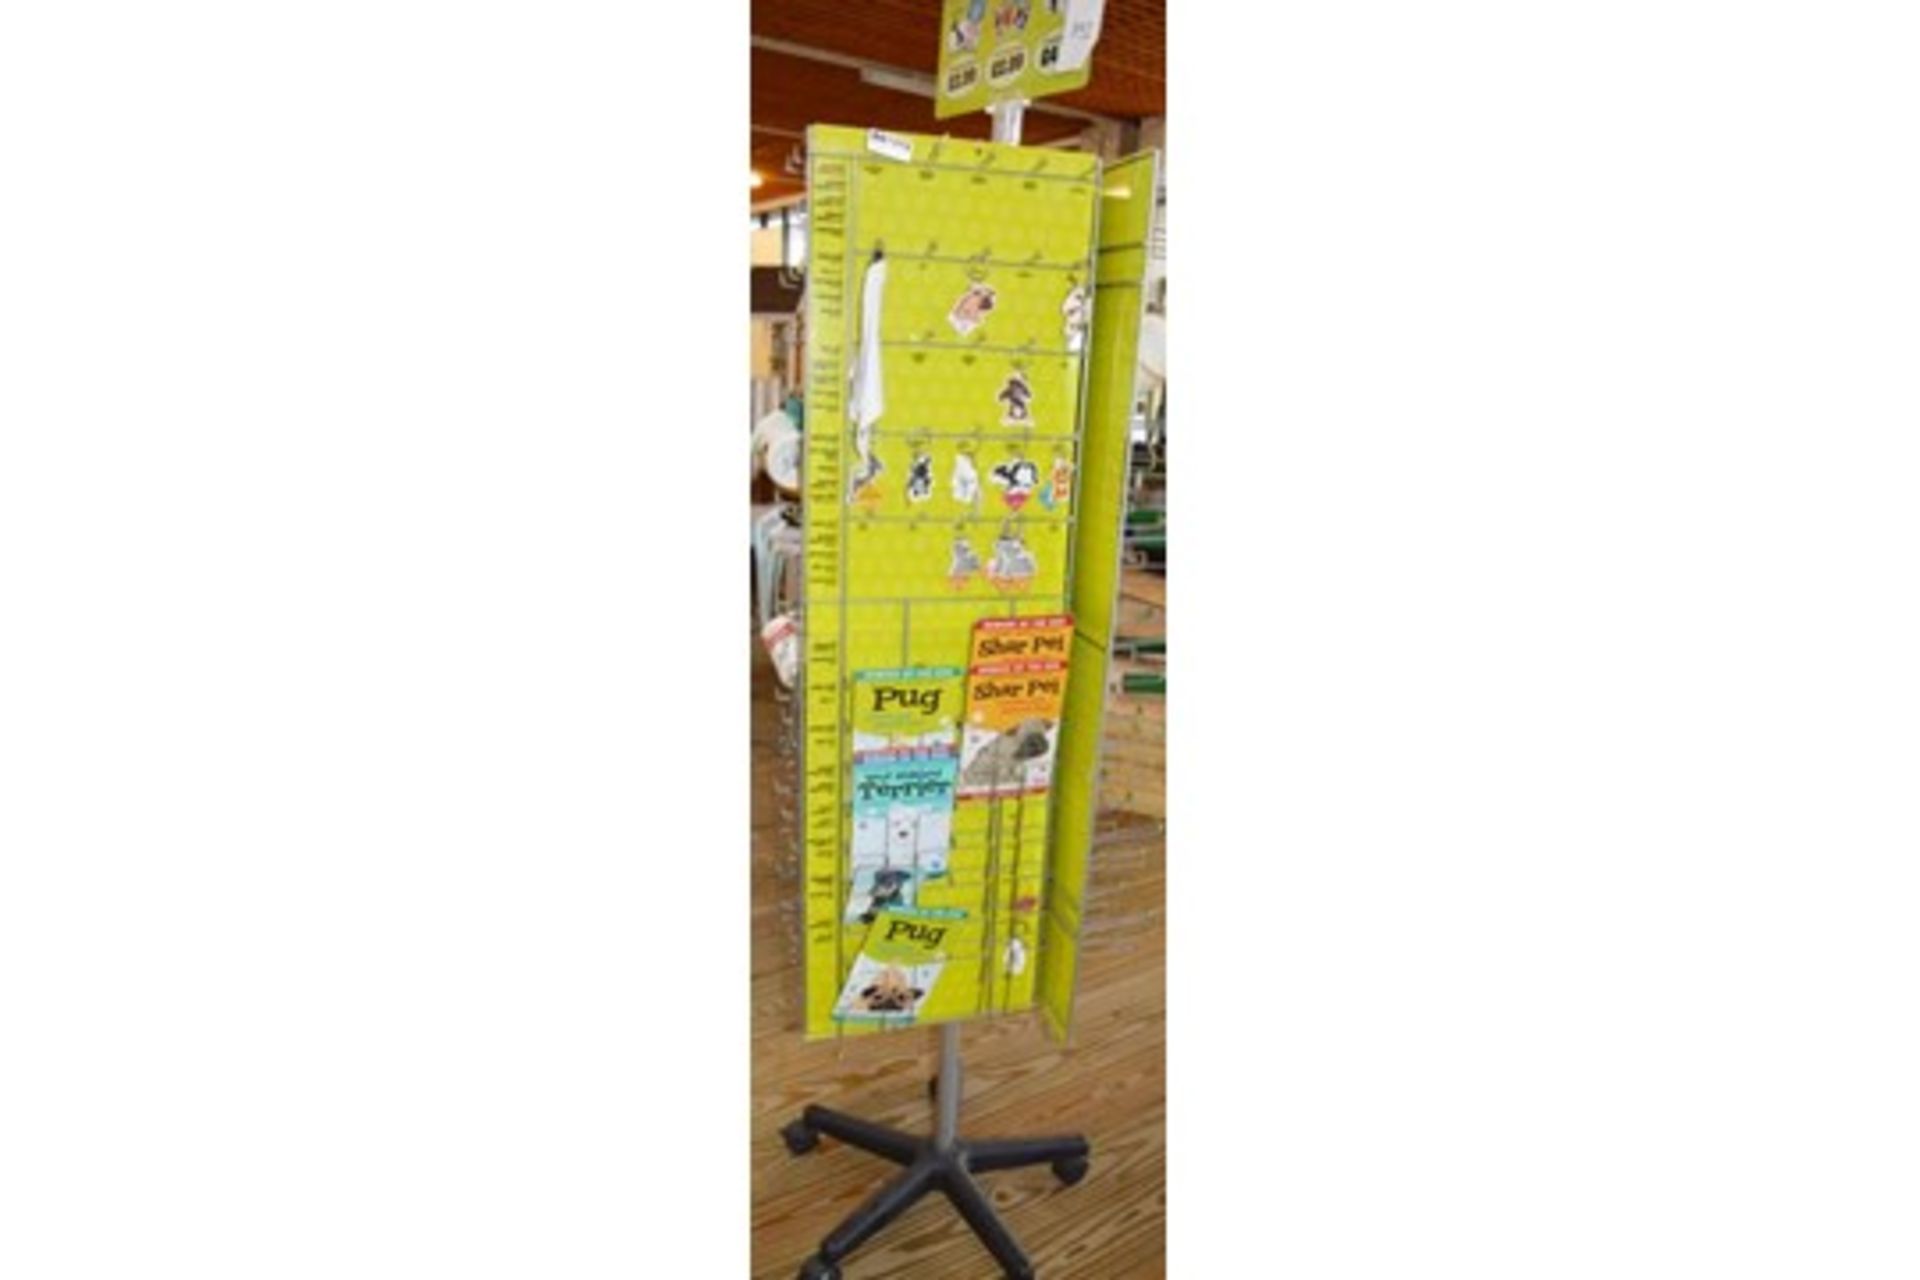 27 x Retail Carousel Display Stands With Approximately 2,800 Items of Resale Stock - Includes - Image 44 of 61